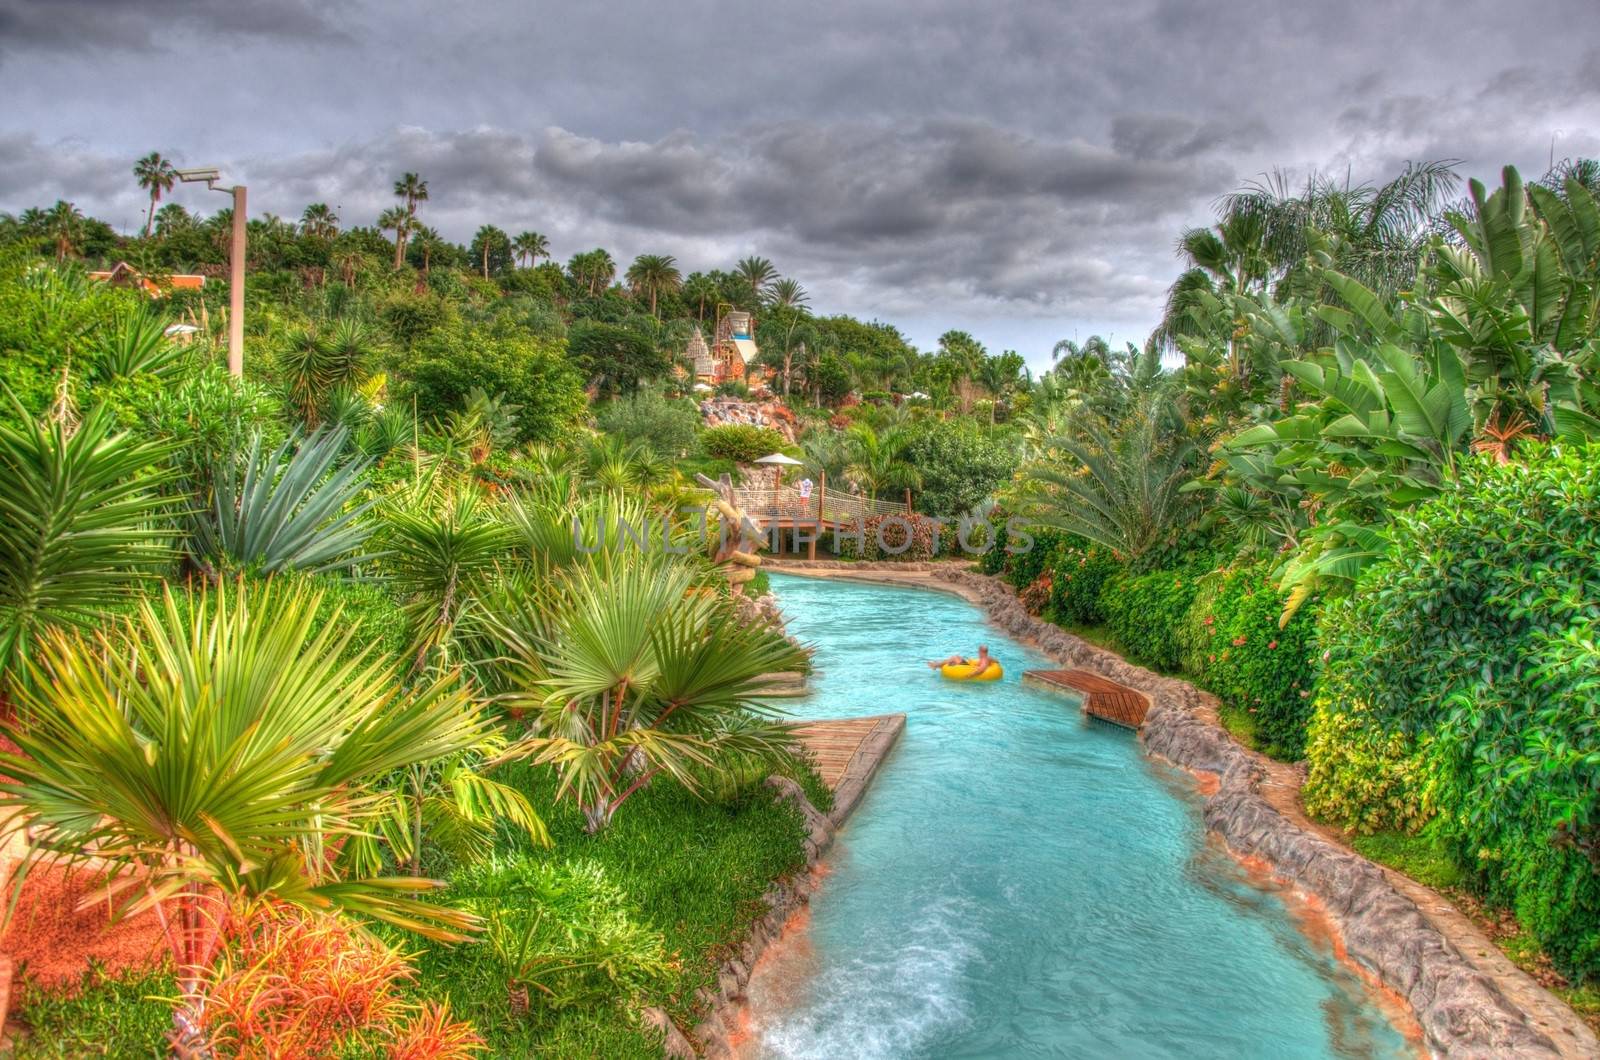 River in the park with palms, Tenerife, Canarian Islands by Eagle2308